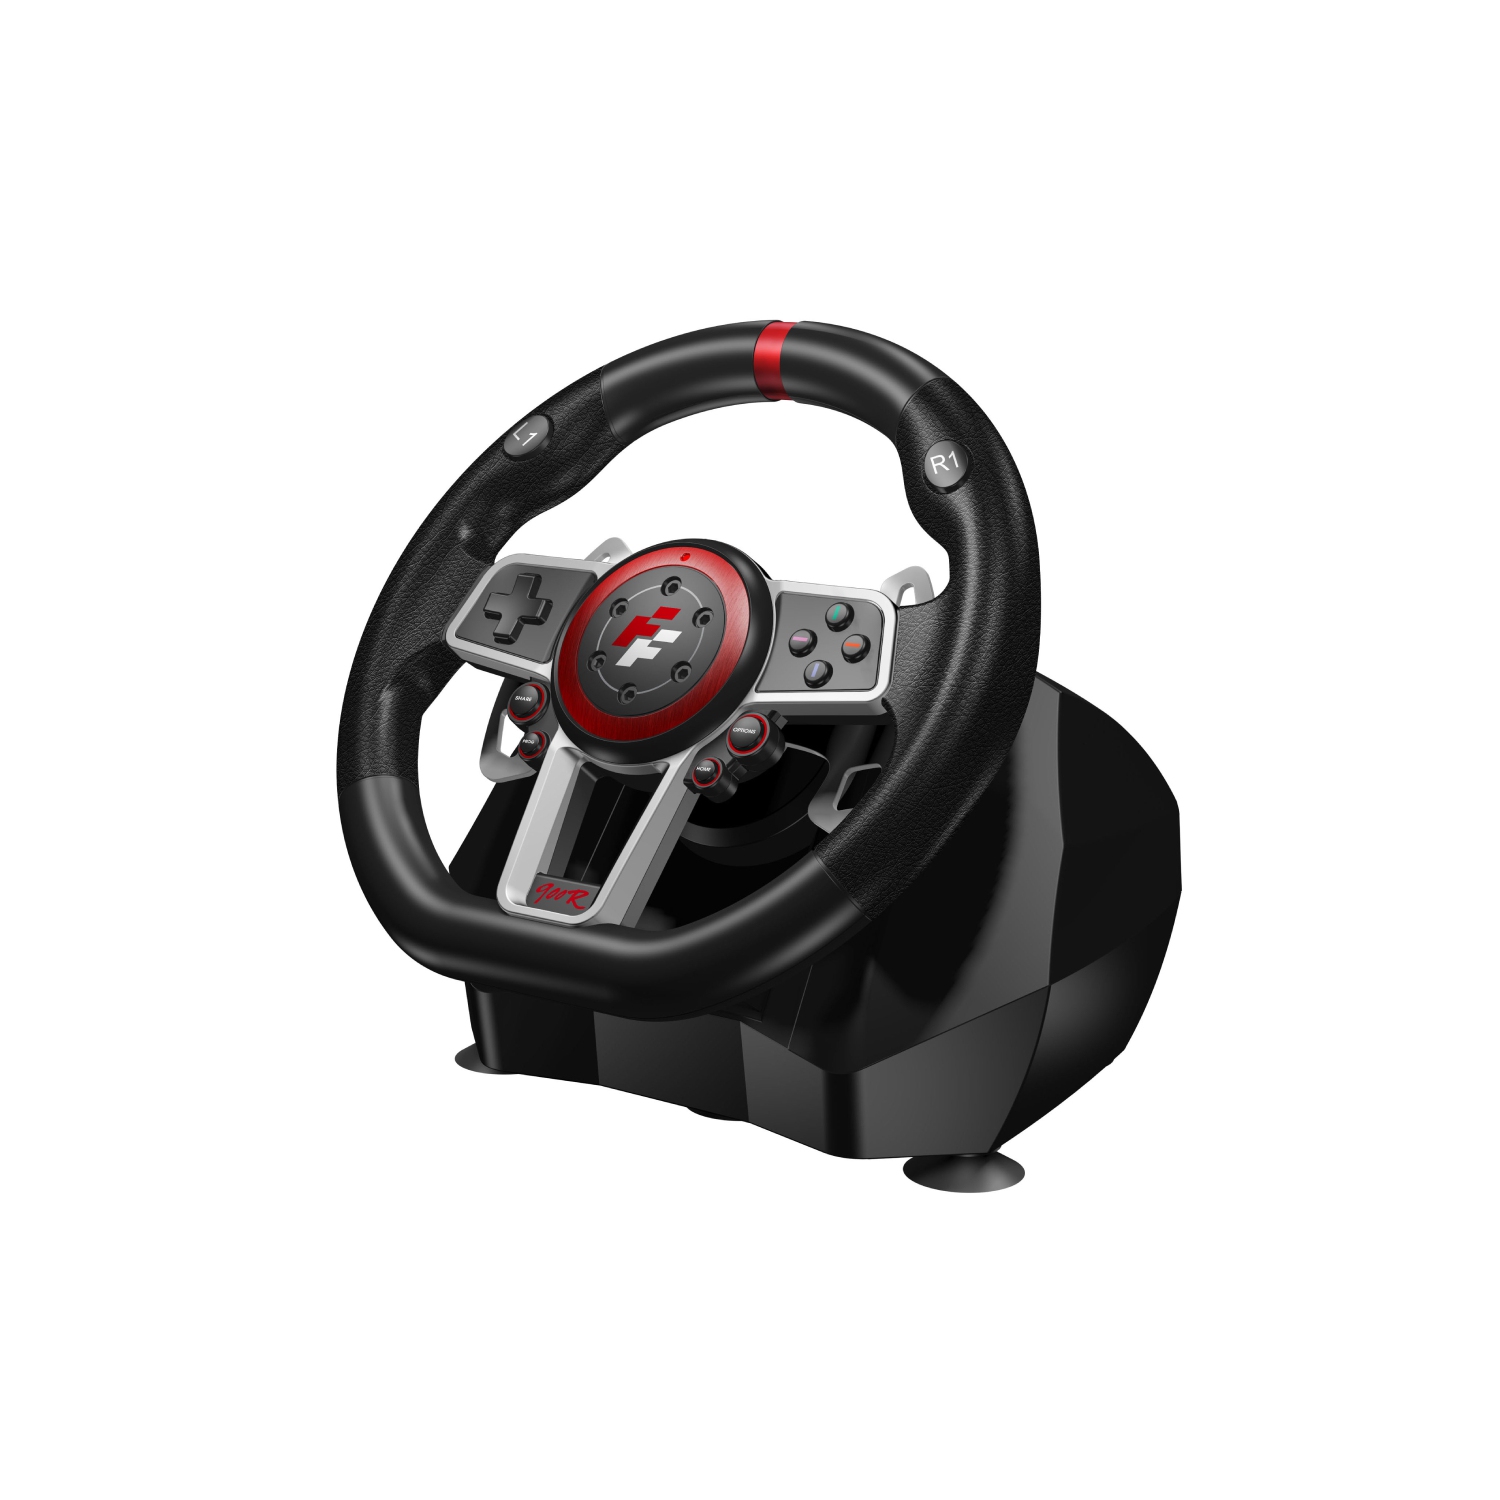 The Best Steering Wheels for Xbox, Playstation, Nintendo Switch - CNET